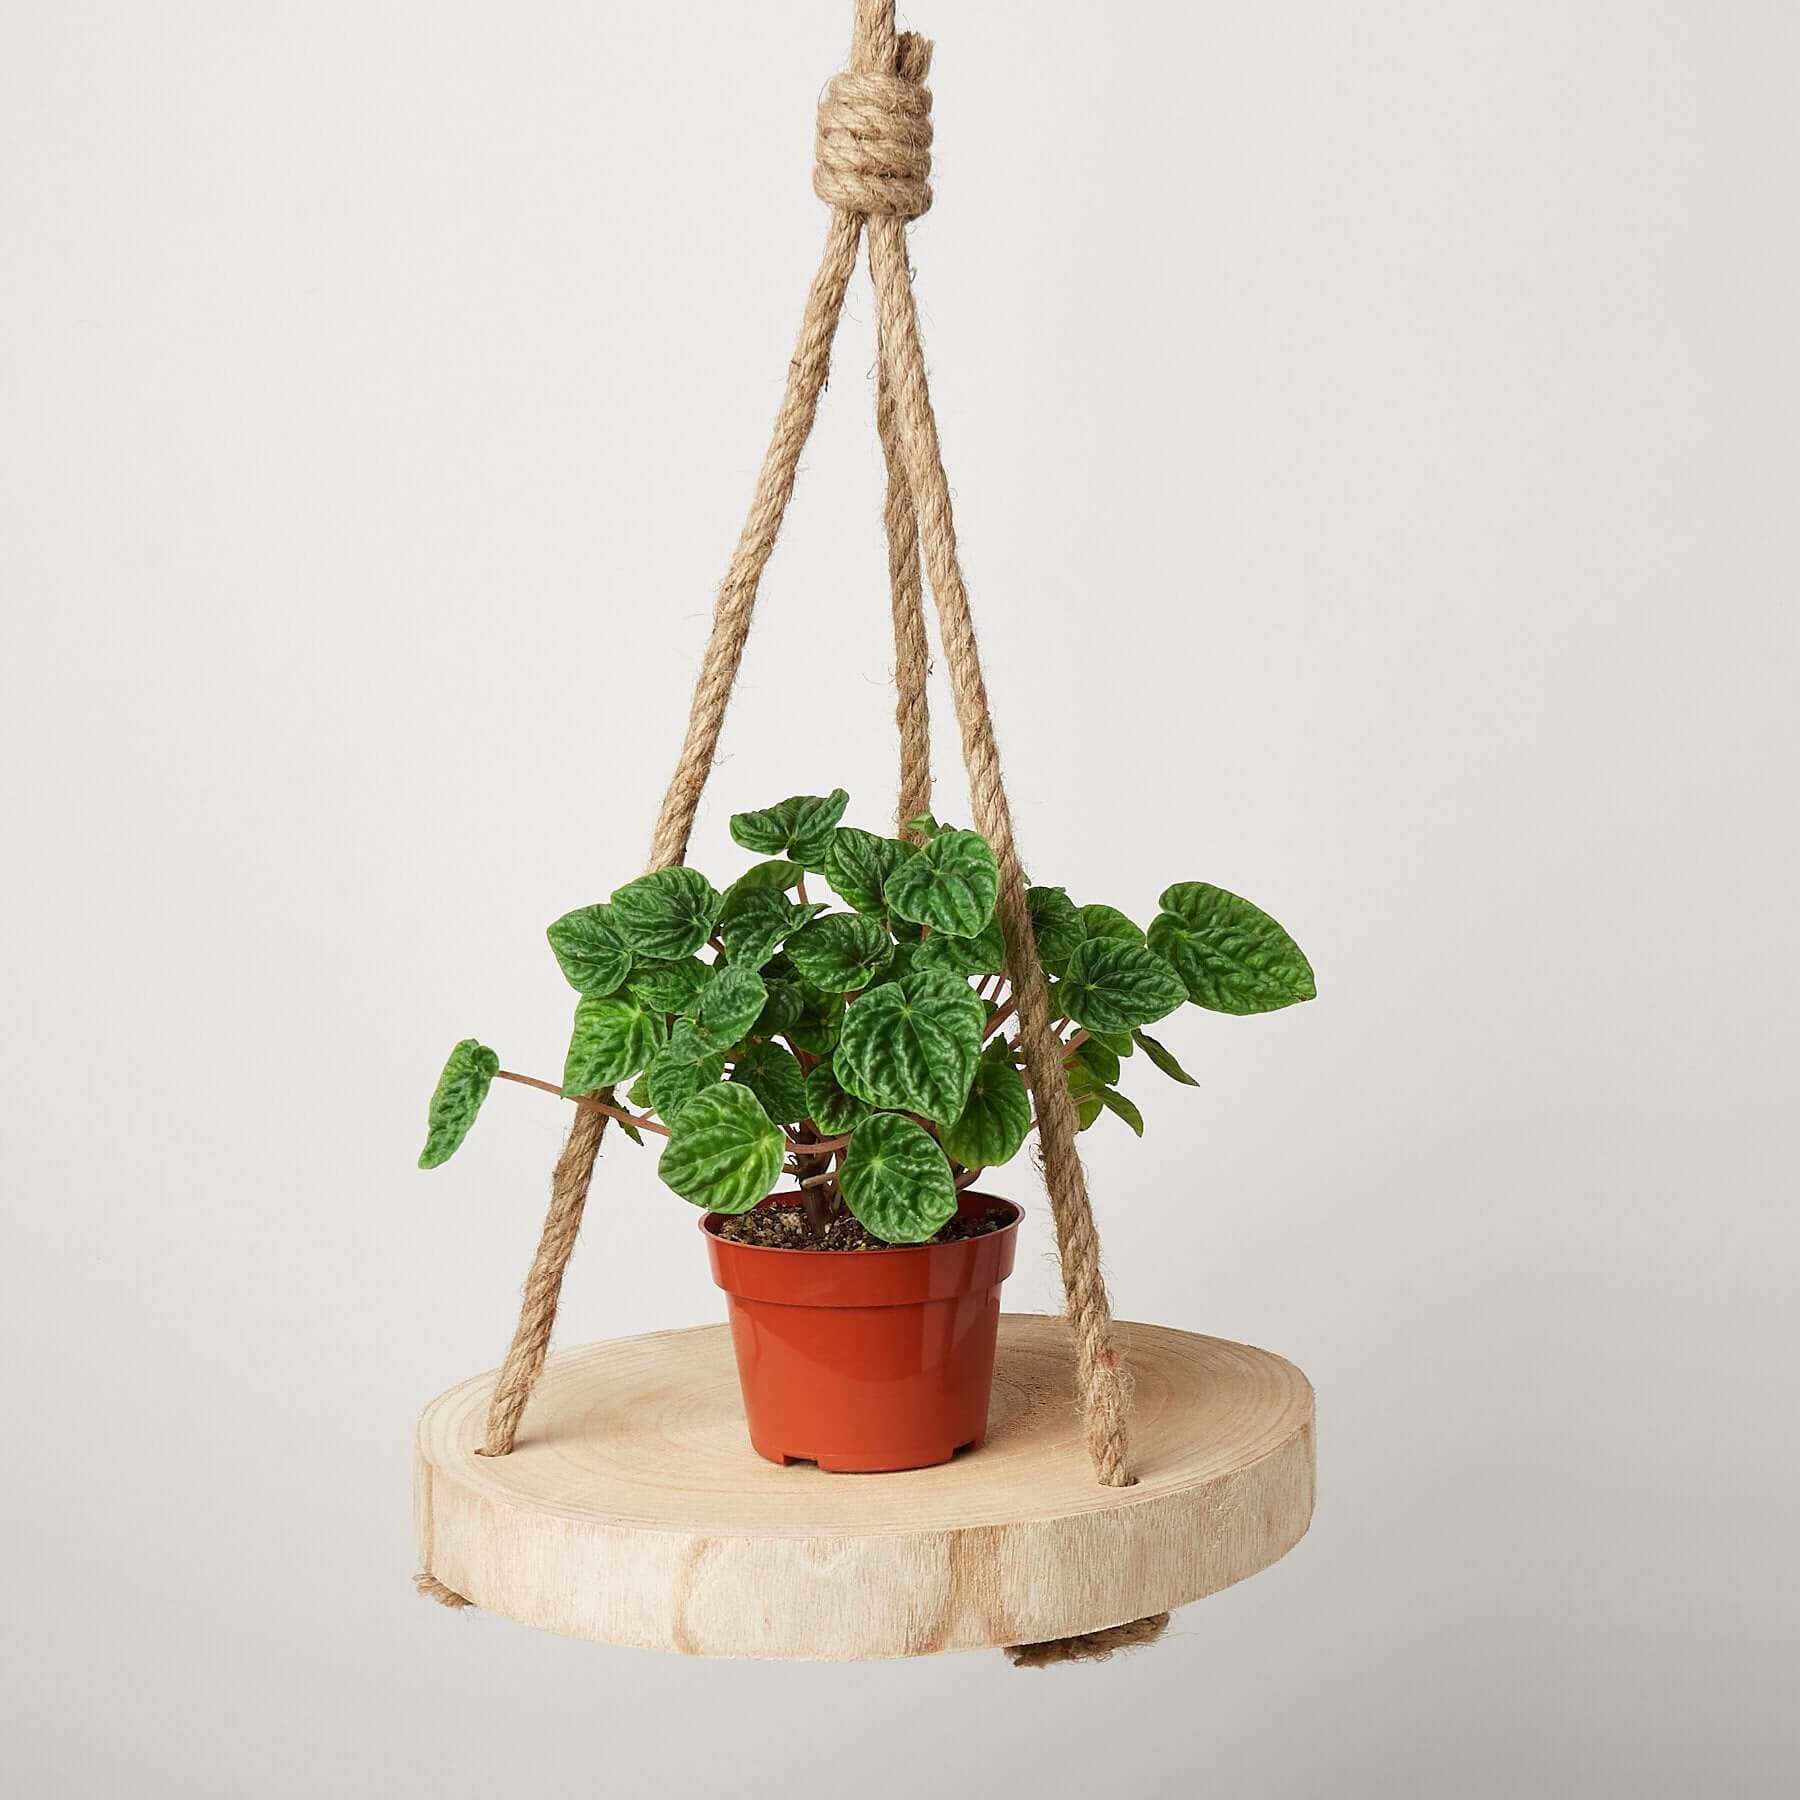 Hanging Wooden Plant Tray | Modern house plants that clean the air